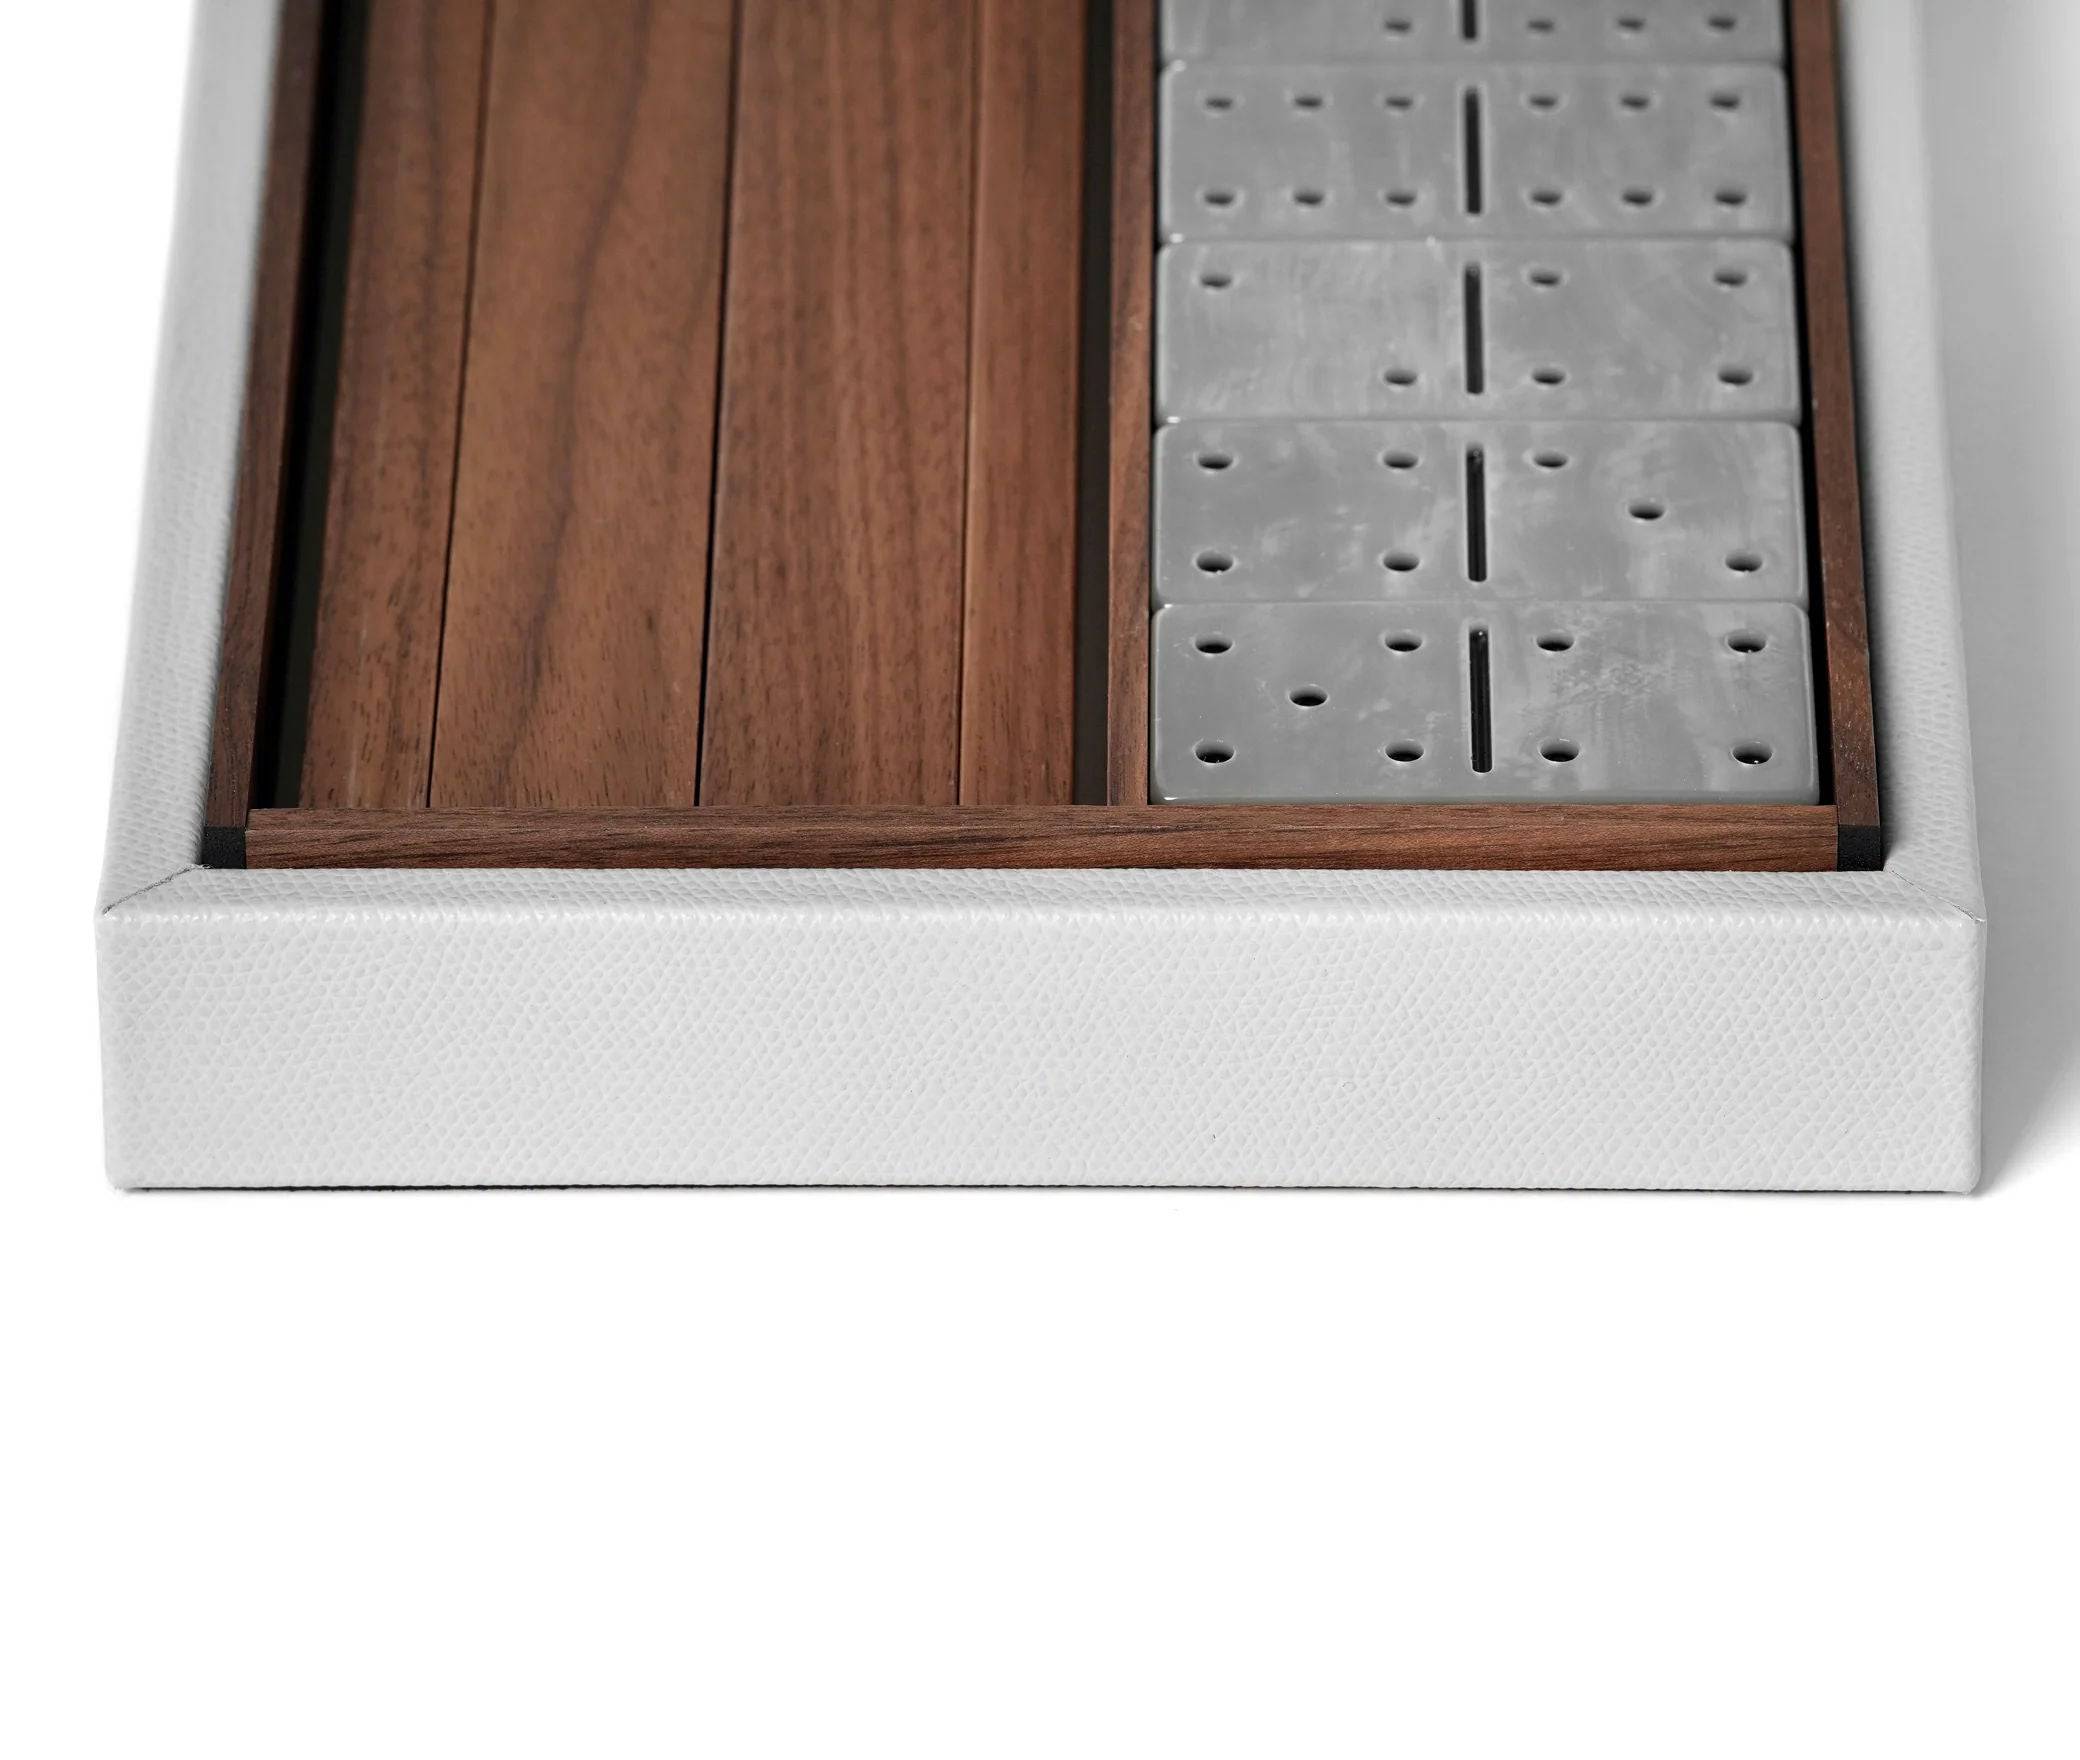 Close-up of a Pinetti Dominoes Set with wooden and steel sections framed in white, showing a contrast of materials and high-quality craftsmanship.